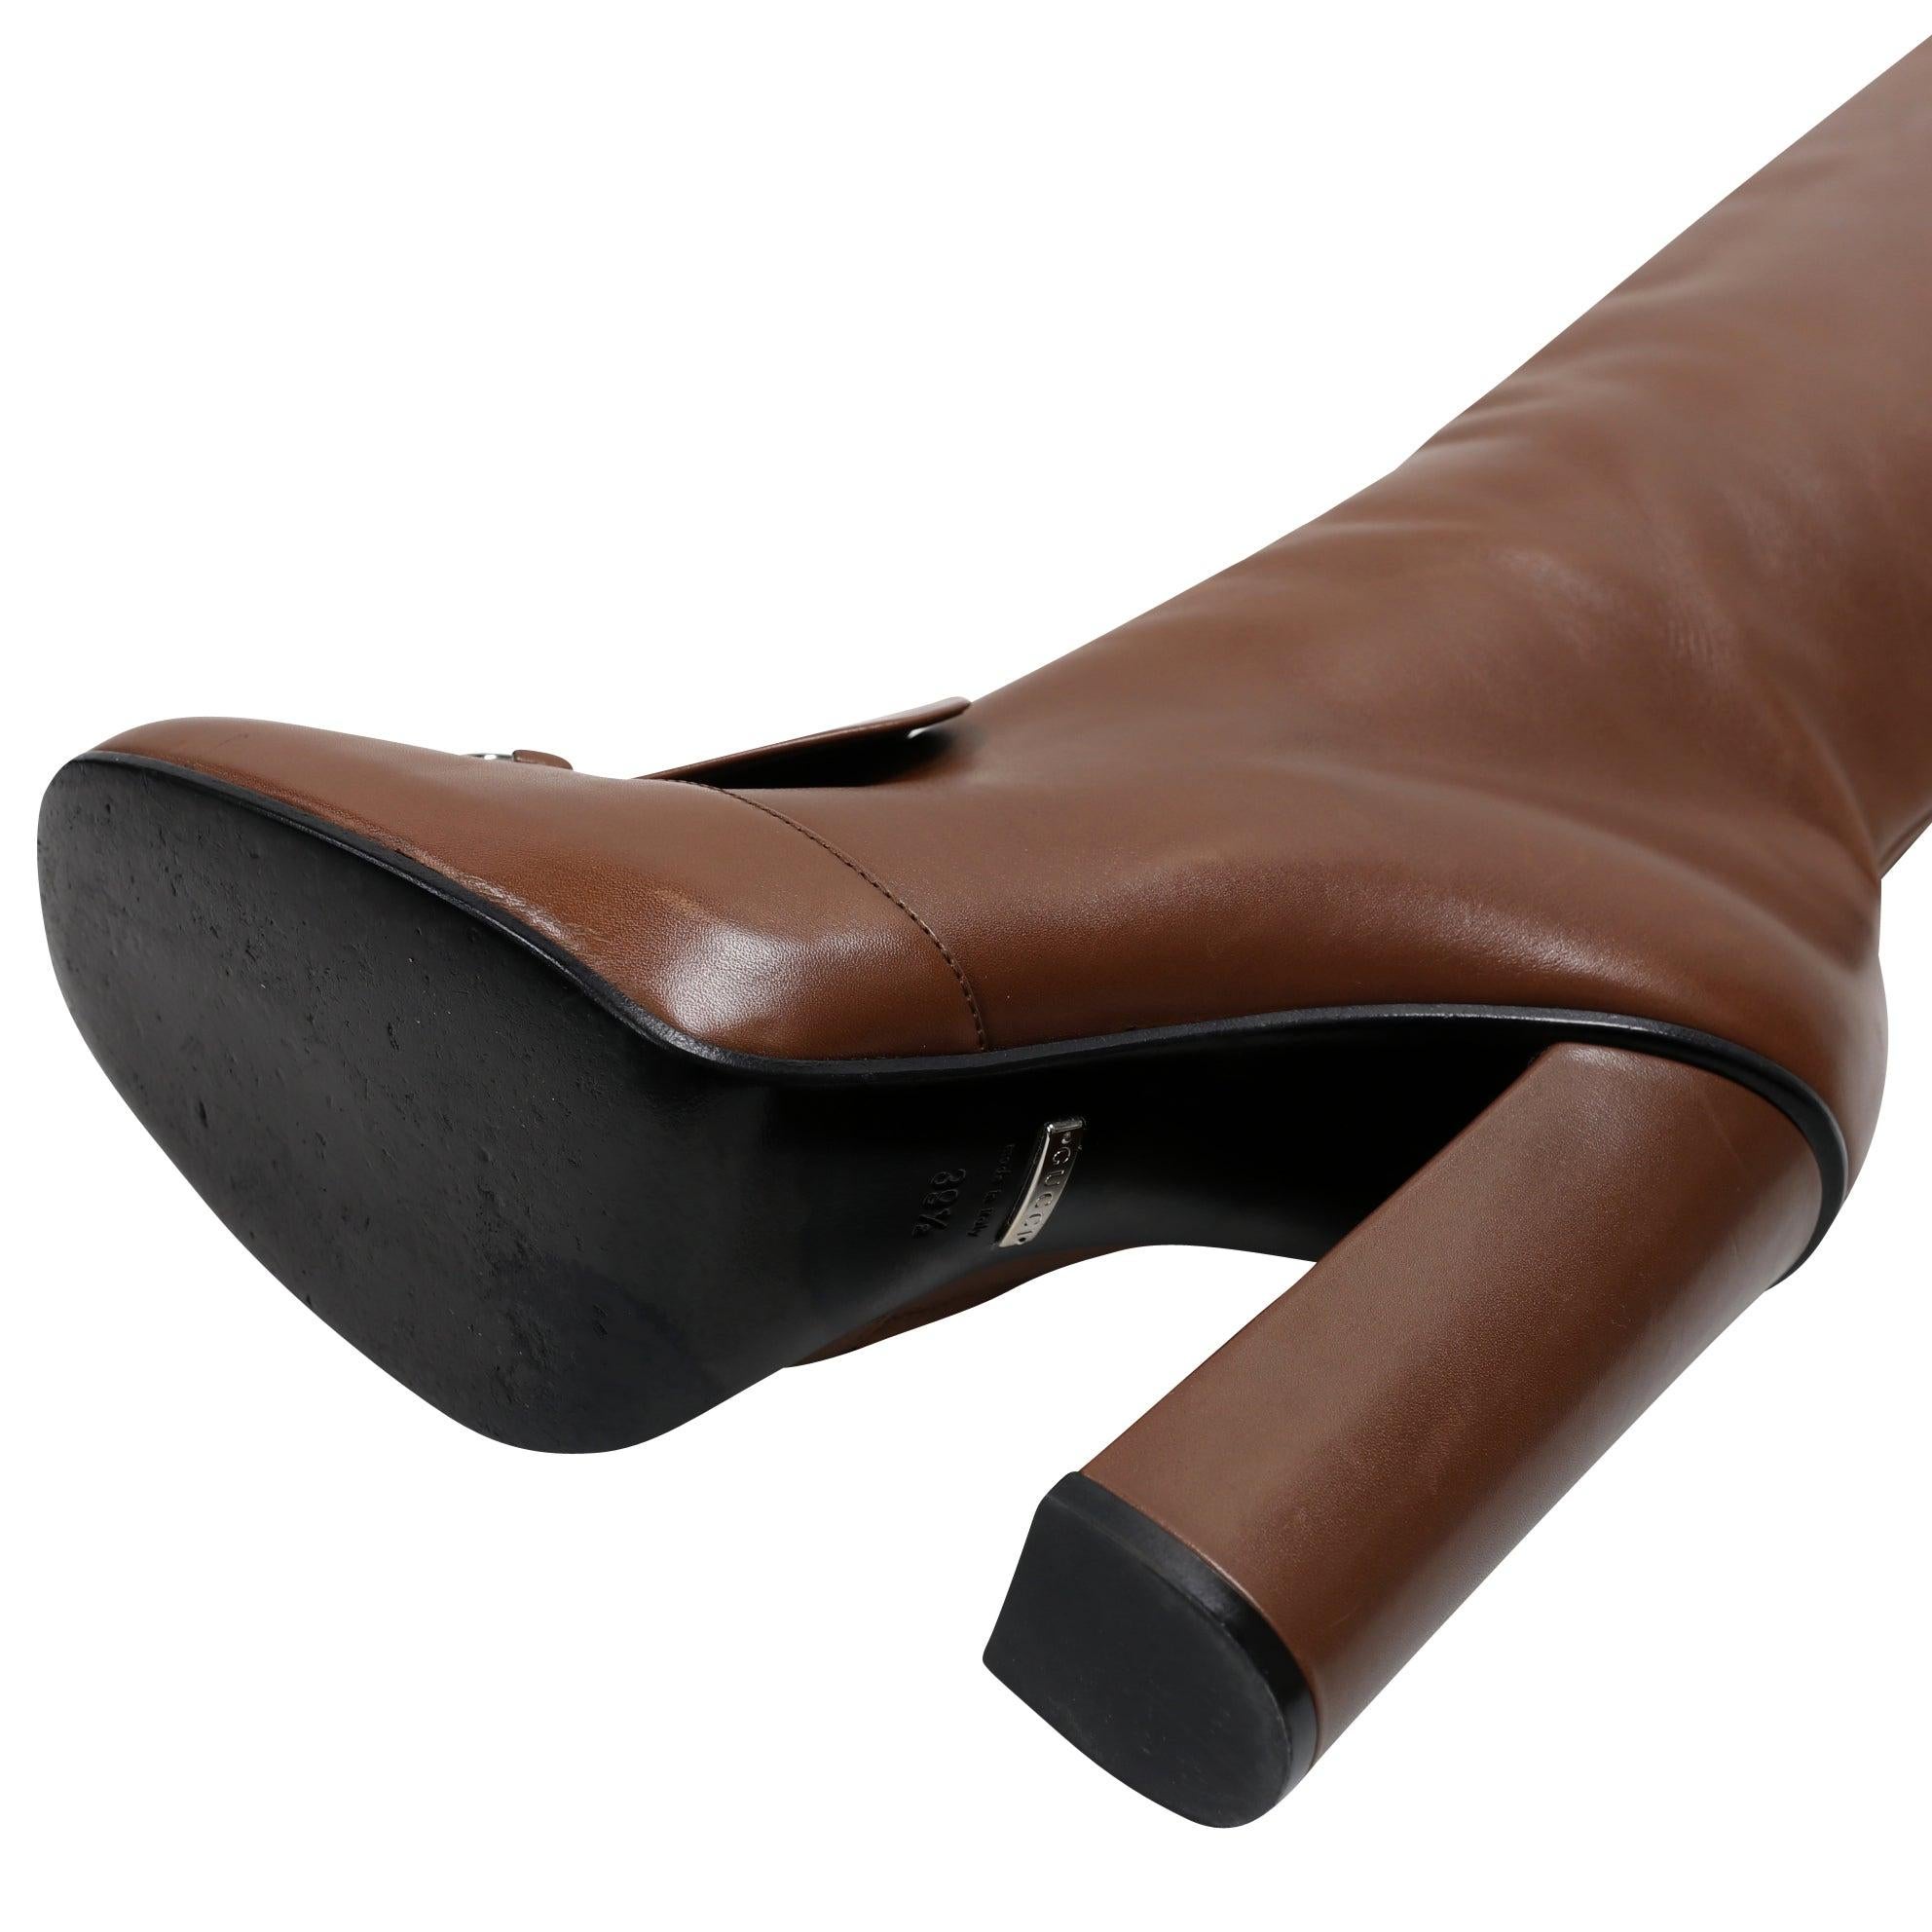 Gucci Brown Leather Horsebit Knee High Riding Boots 39.5 GG-S1111P-0001 For Sale 6